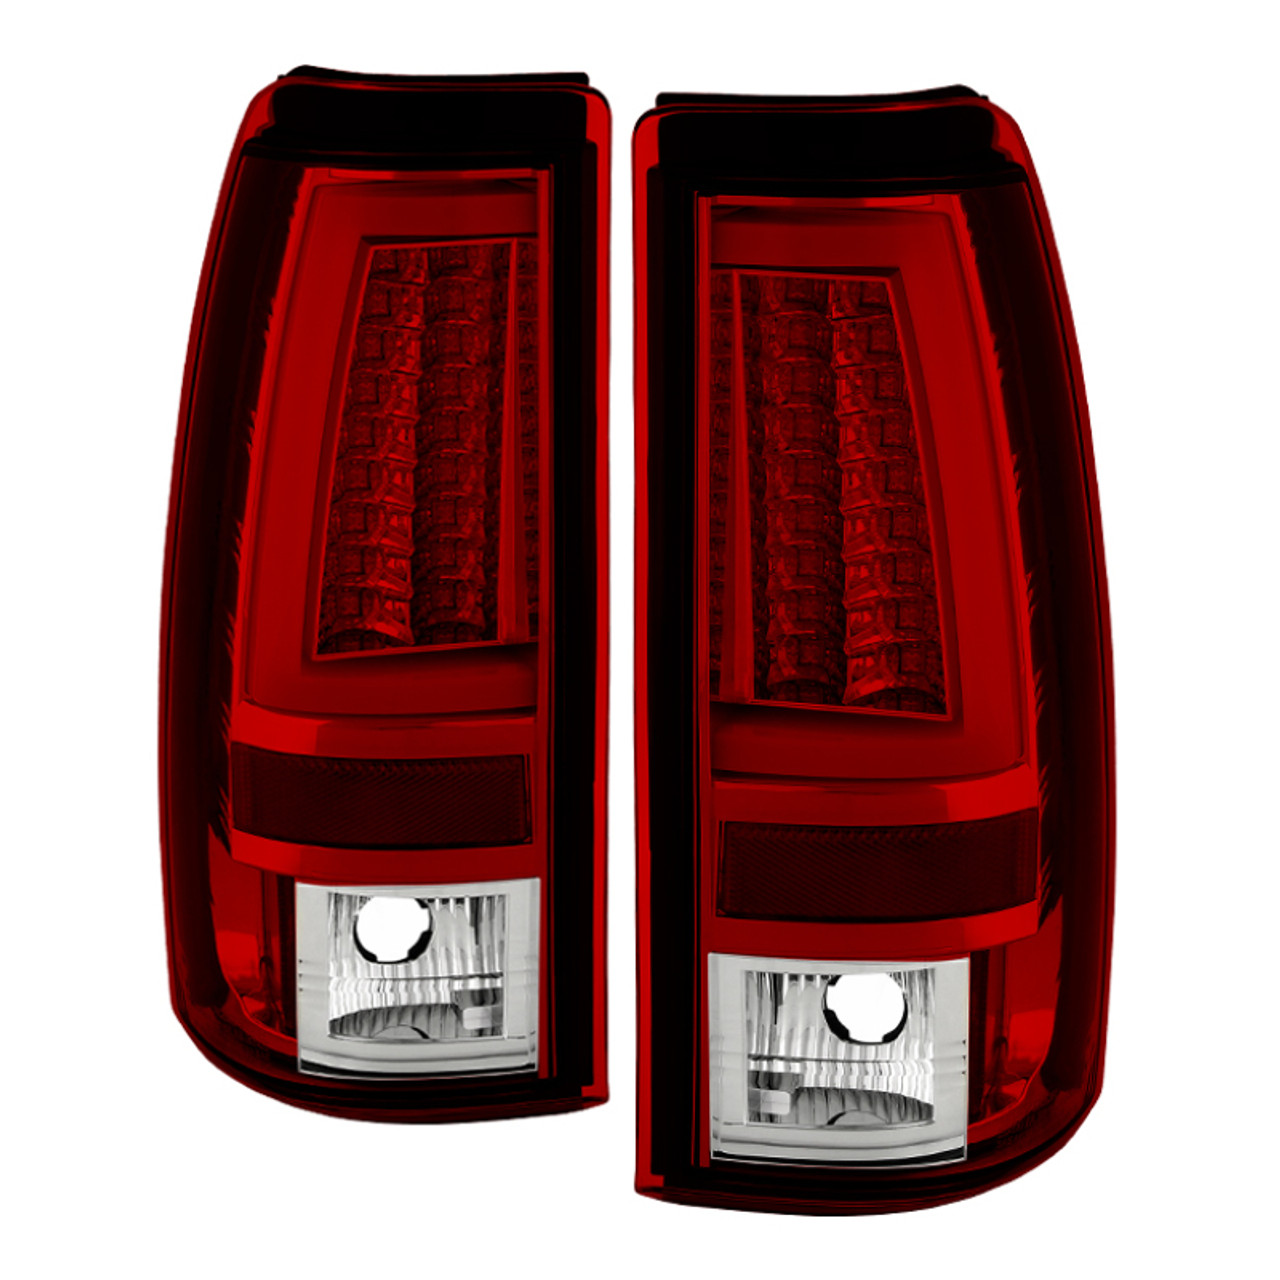 Spyder Chevy Silverado 1500/2500 99-02 Version 2 LED Tail Lights - Red  Clear ALT-YD-CS99V2-LED-RC - Down East Offroad